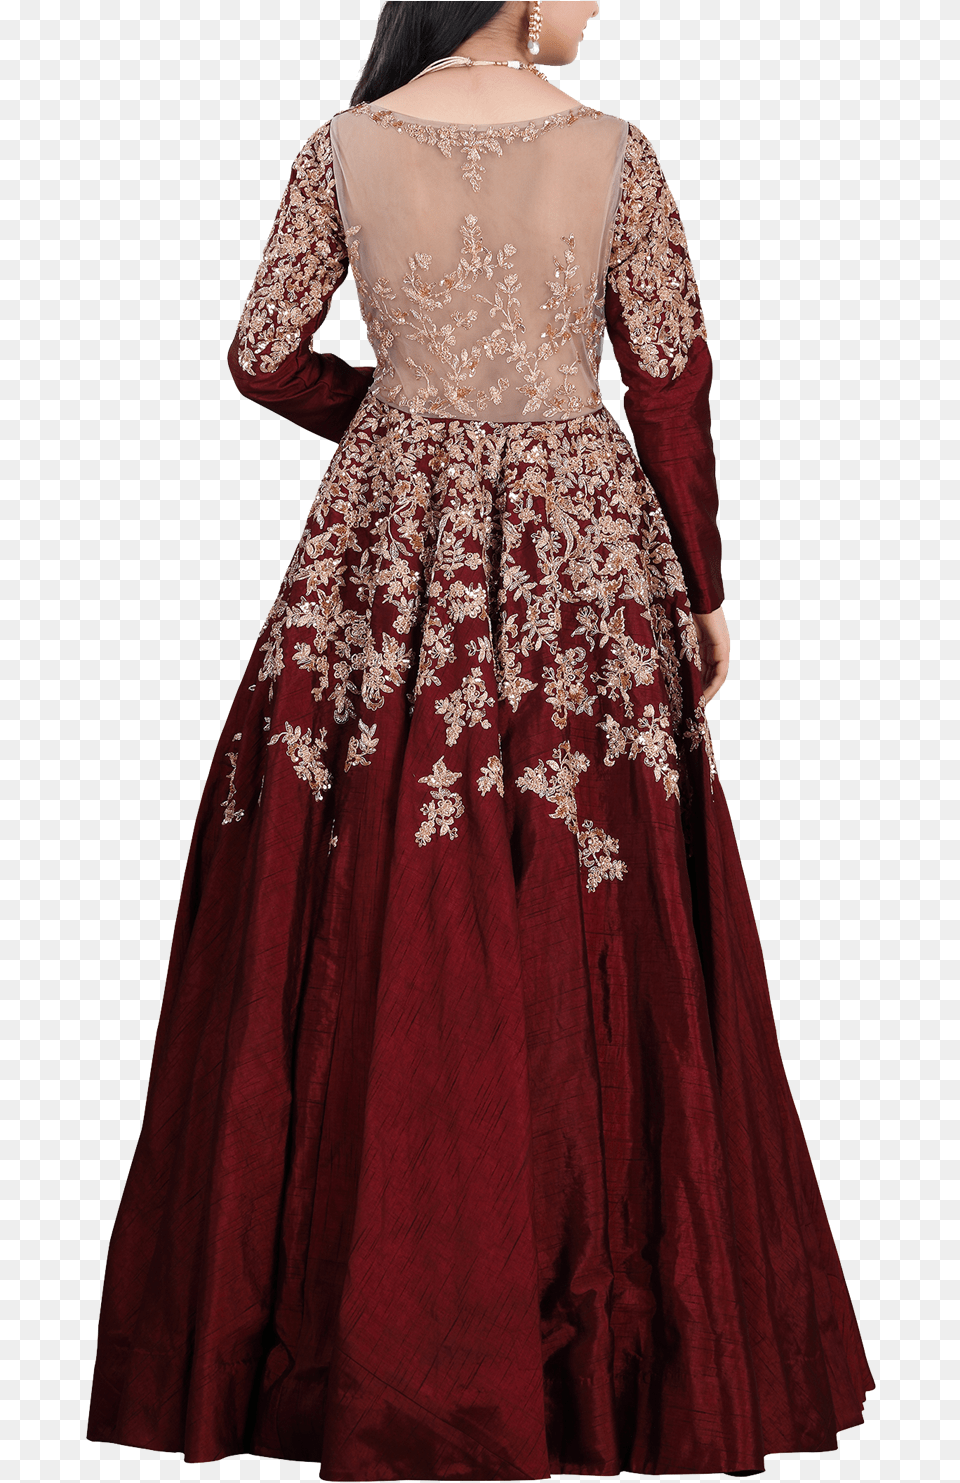 Bridal Gown Pictures Gown, Wedding Gown, Clothing, Dress, Evening Dress Png Image